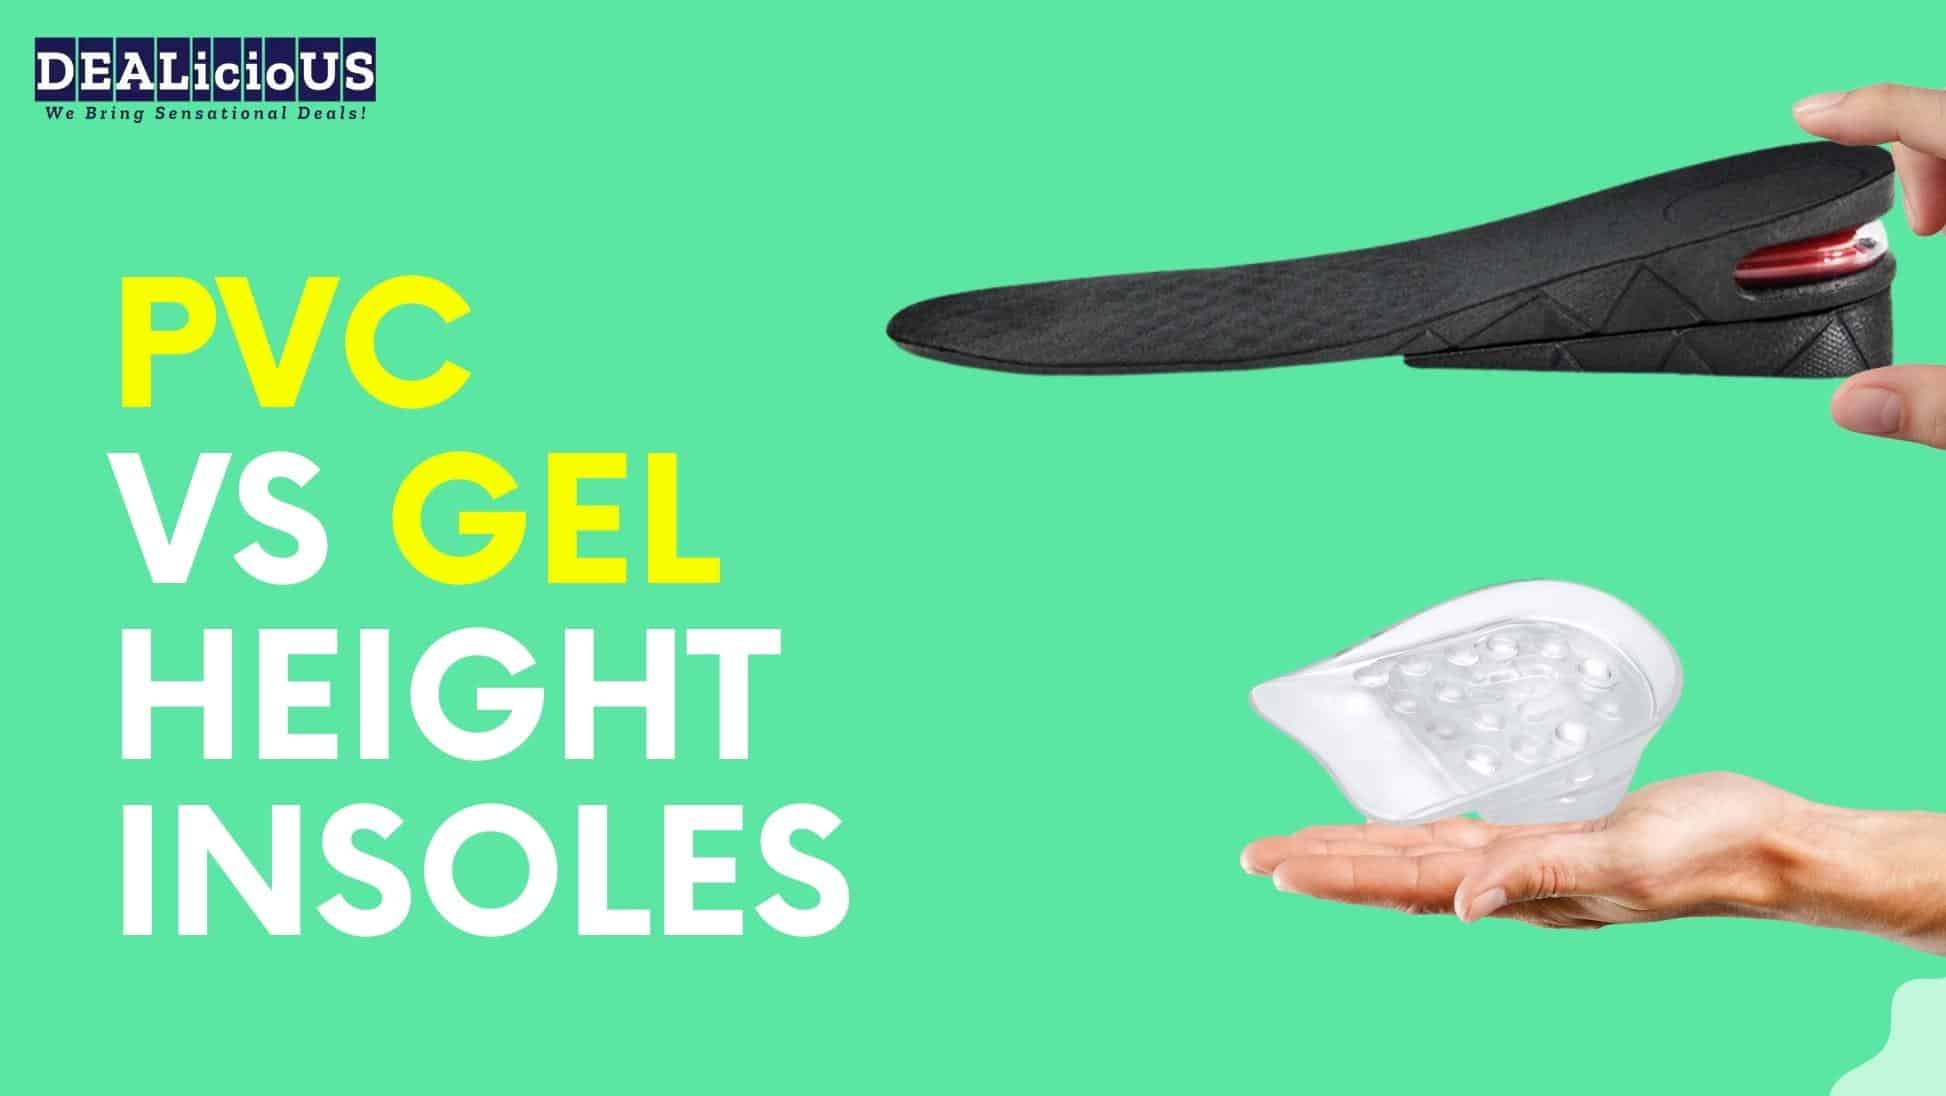 PVC height insoles